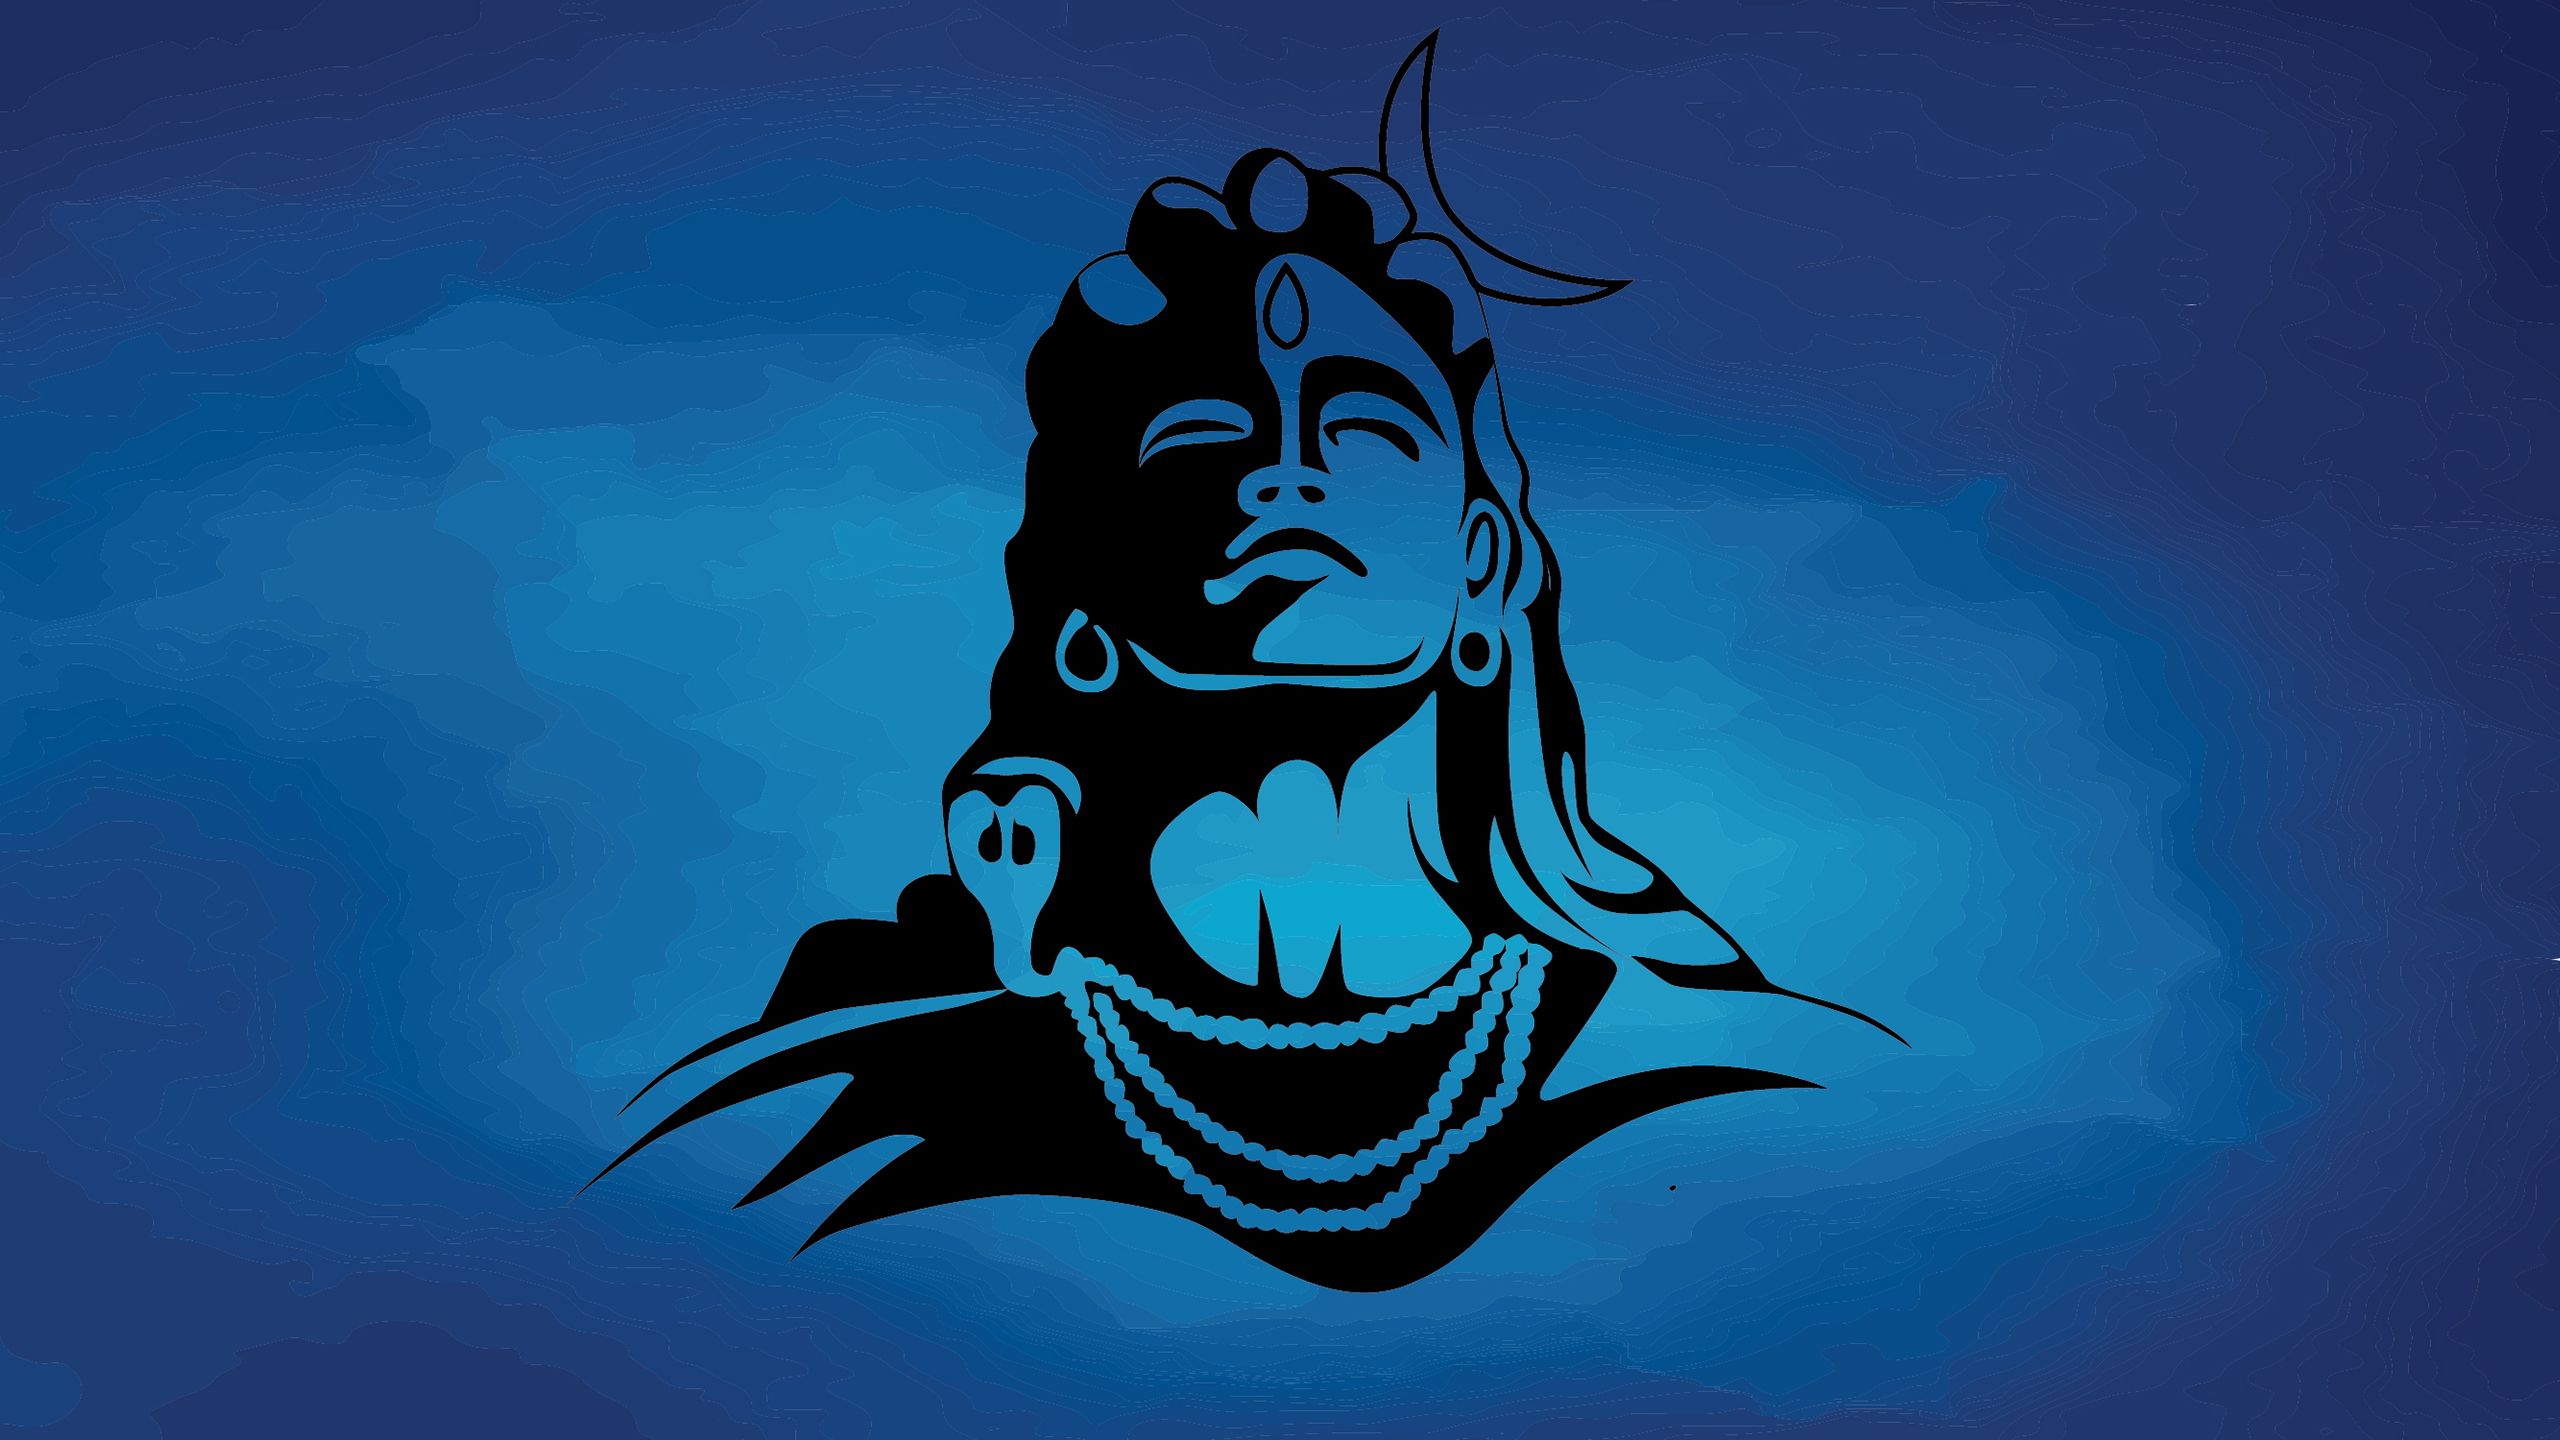 lord shiva hd wallpapers 1080p download for pc